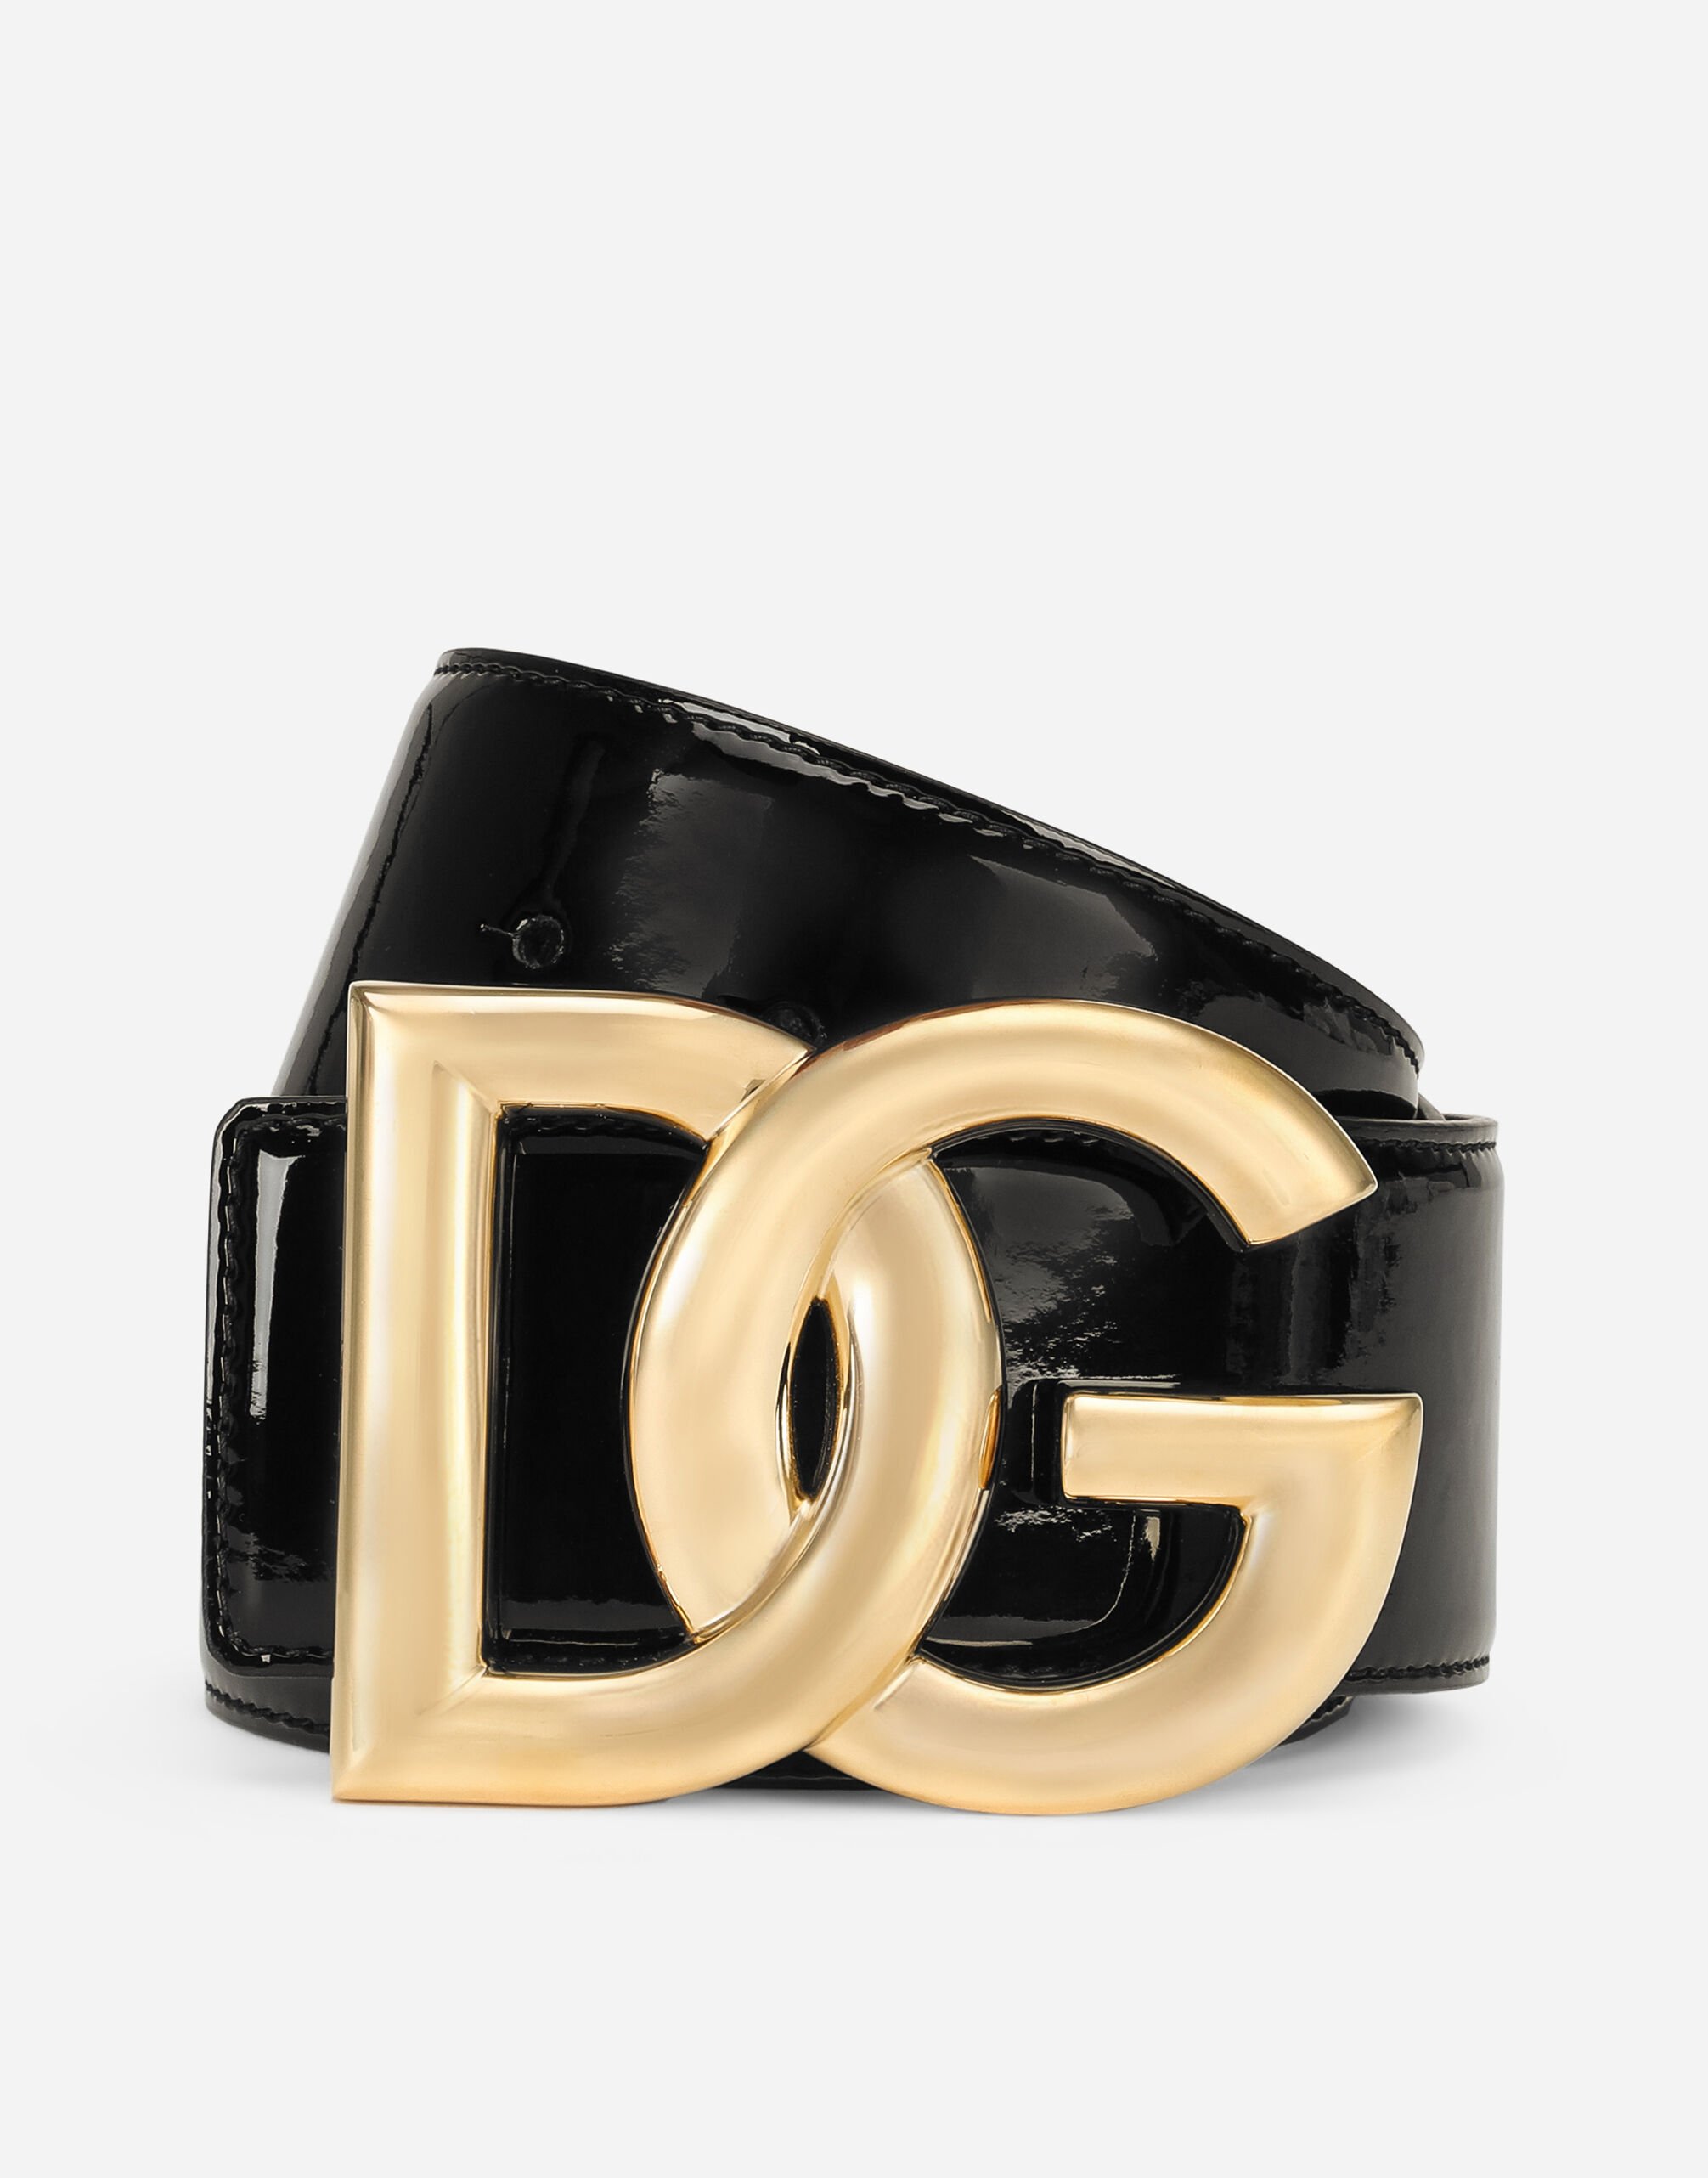 Patent leather belt with DG logo